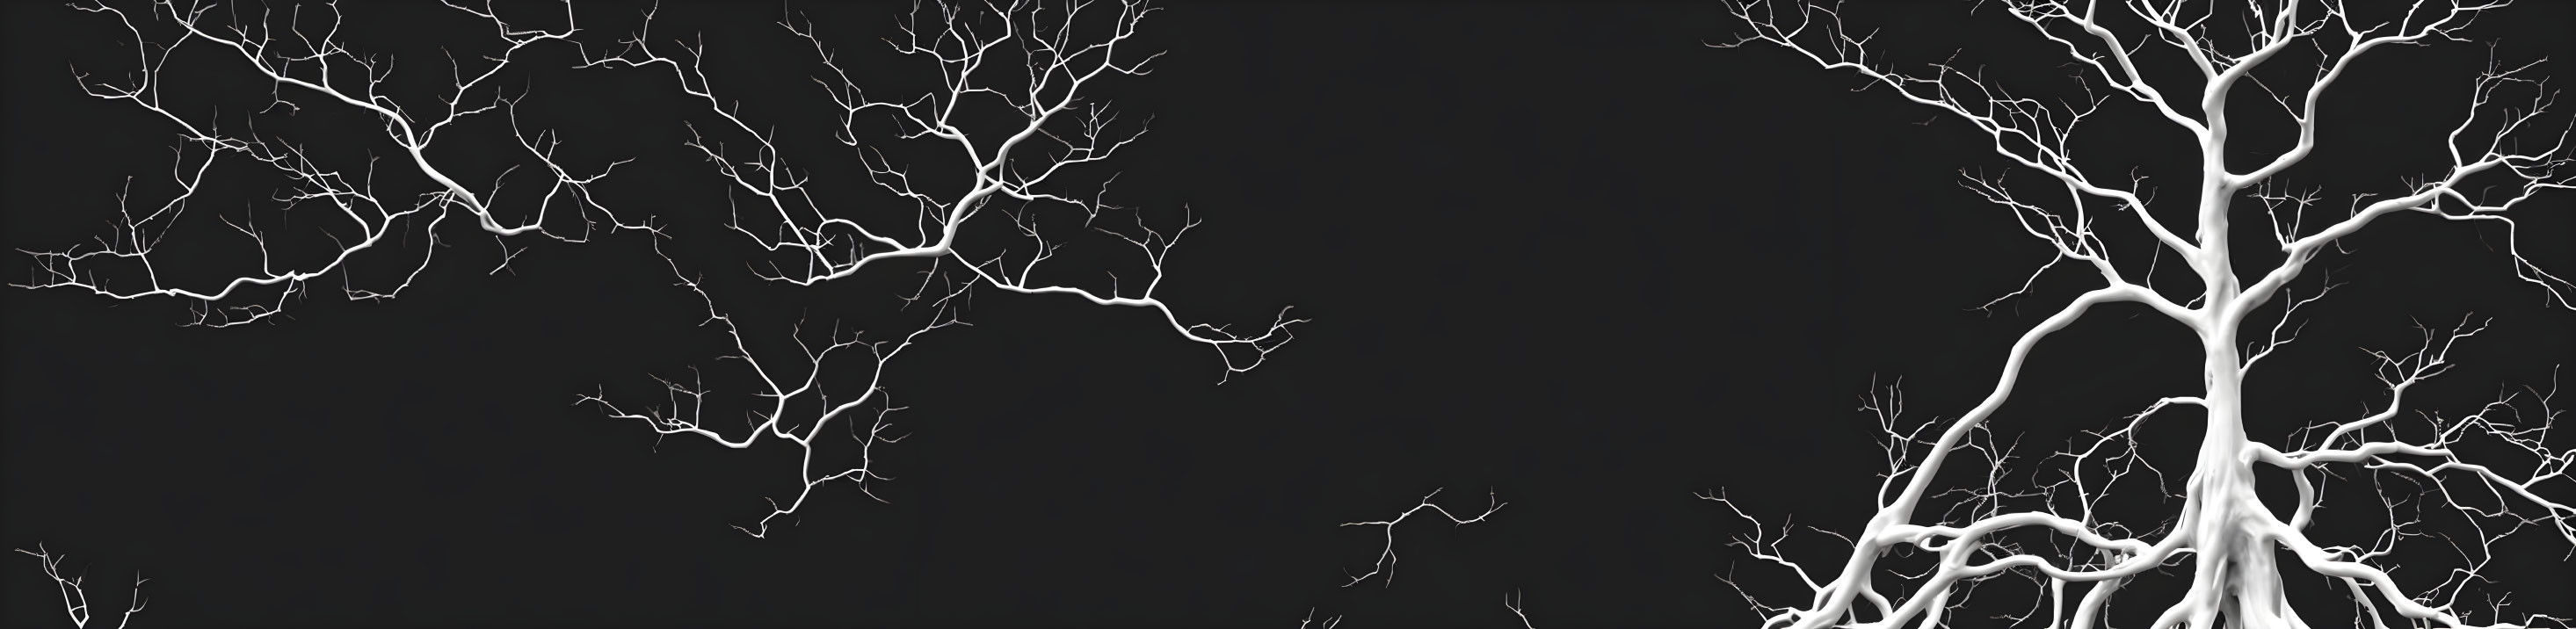 Intricate white branches on dark background, resembling neurons.